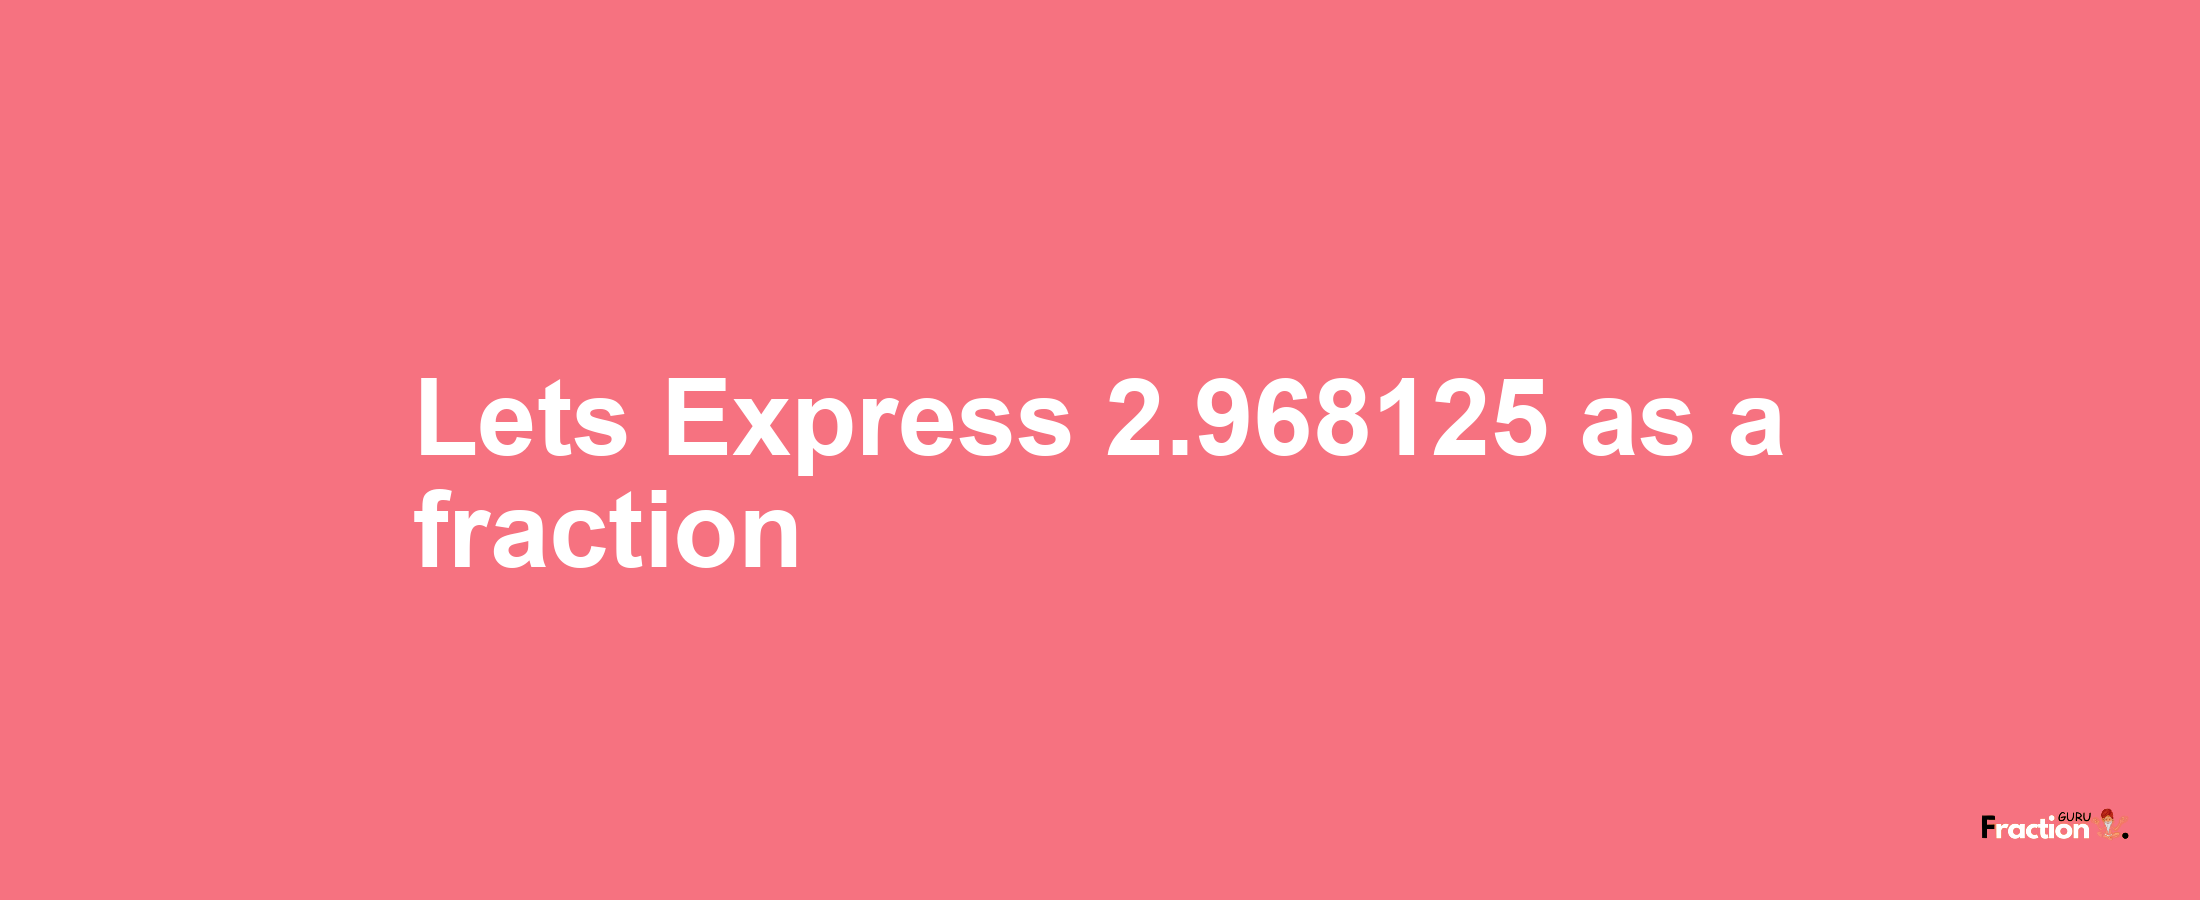 Lets Express 2.968125 as afraction